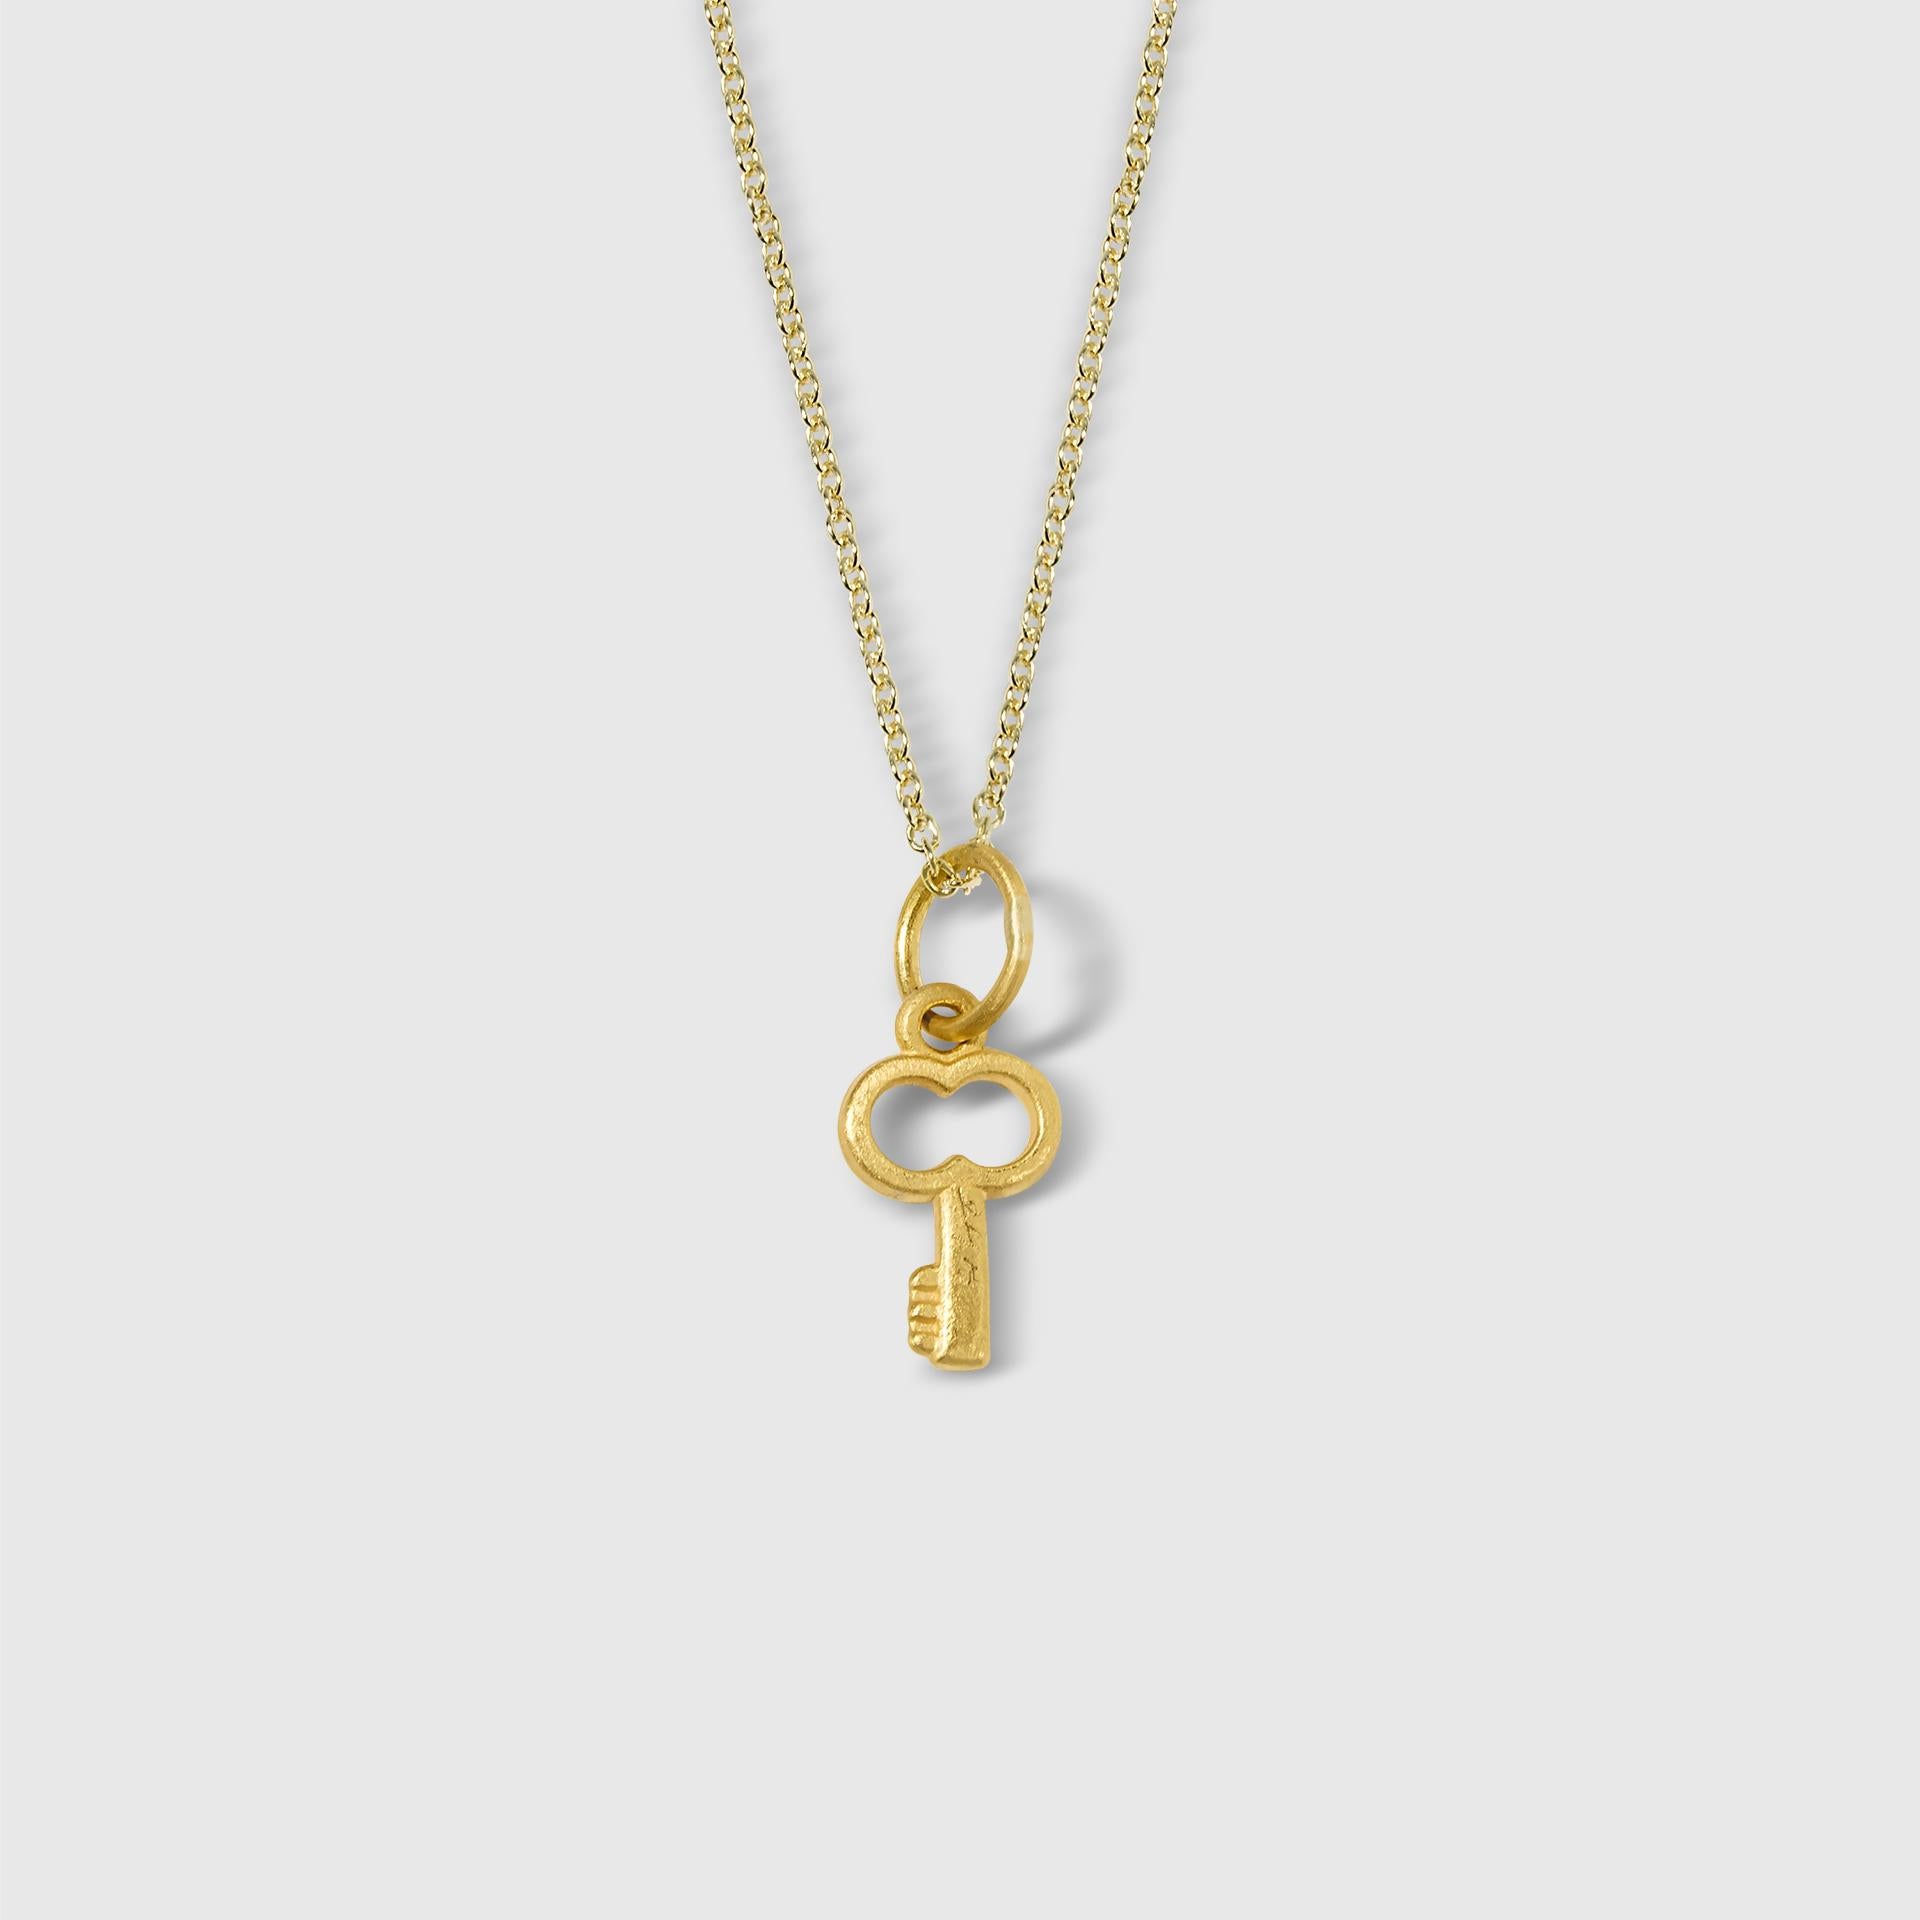 Miniature Key Charm Pendant Necklace, 24kt Solid Gold In New Condition For Sale In Bozeman, MT